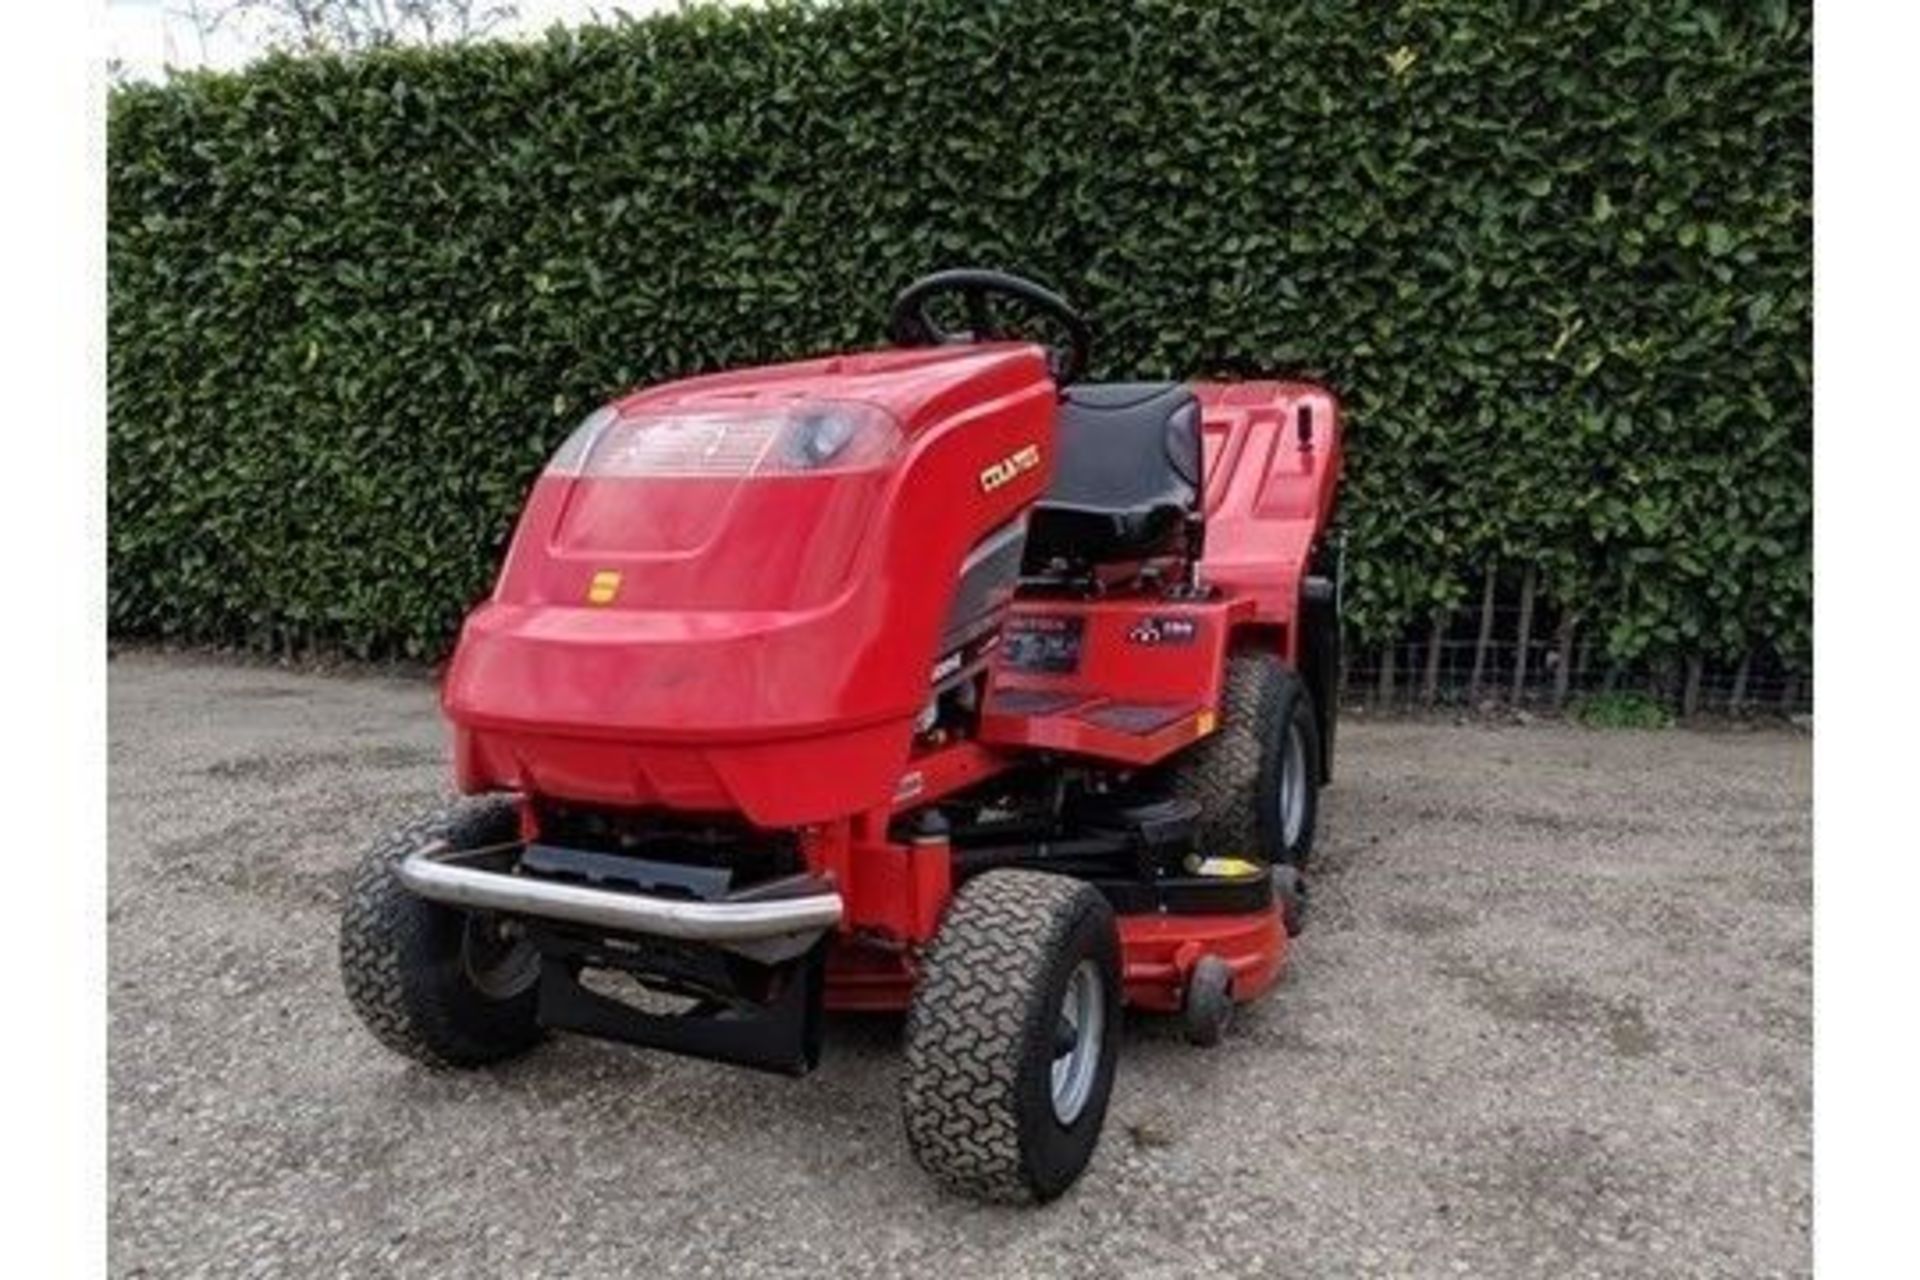 Countax C600HE 44" Rear Discharge Garden Tractor With PGC - Image 4 of 6